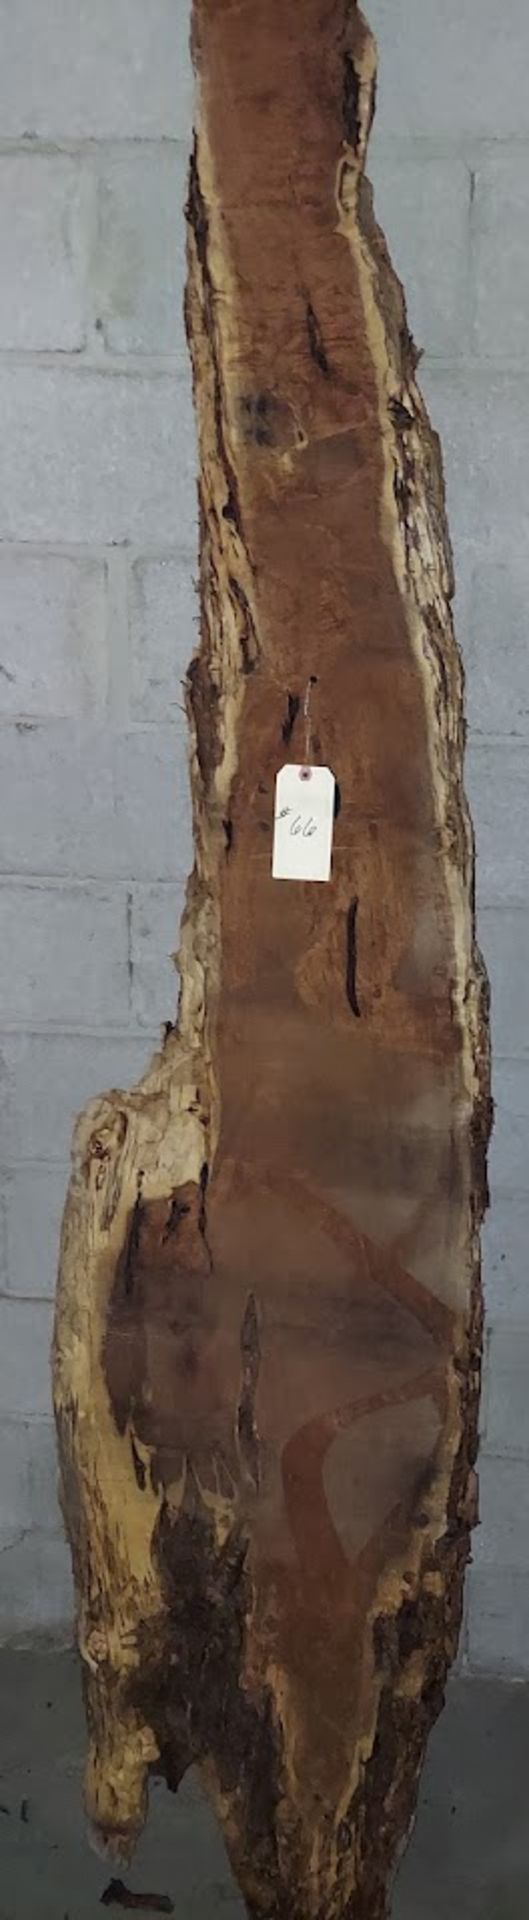 Mesquite Hardwood Lumber Slab, Size is approx. 88" x 7"-19" x 2"